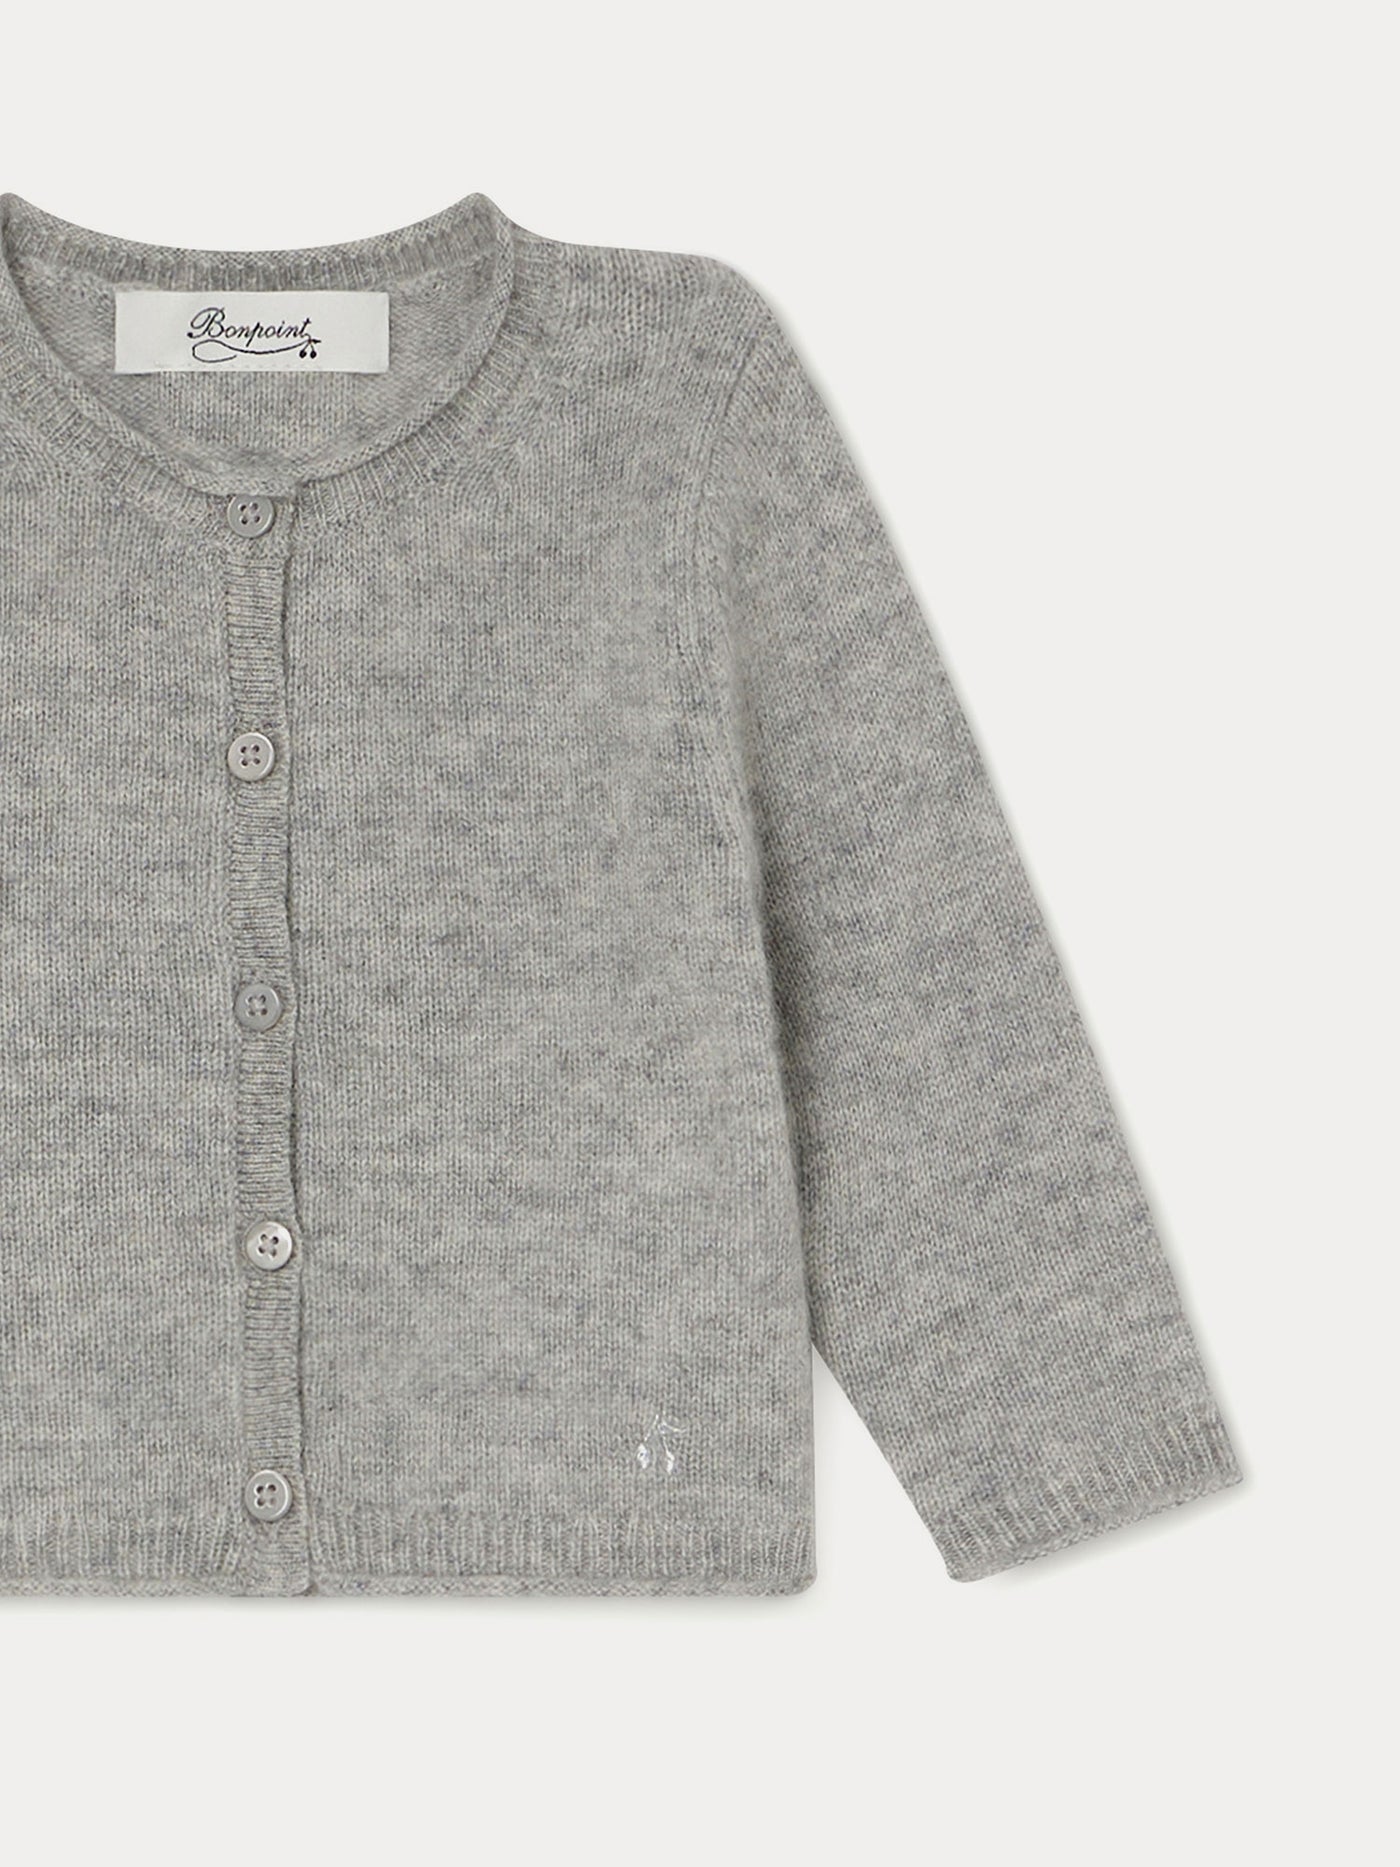 Cashmere Cardigan for Baby heathered gray